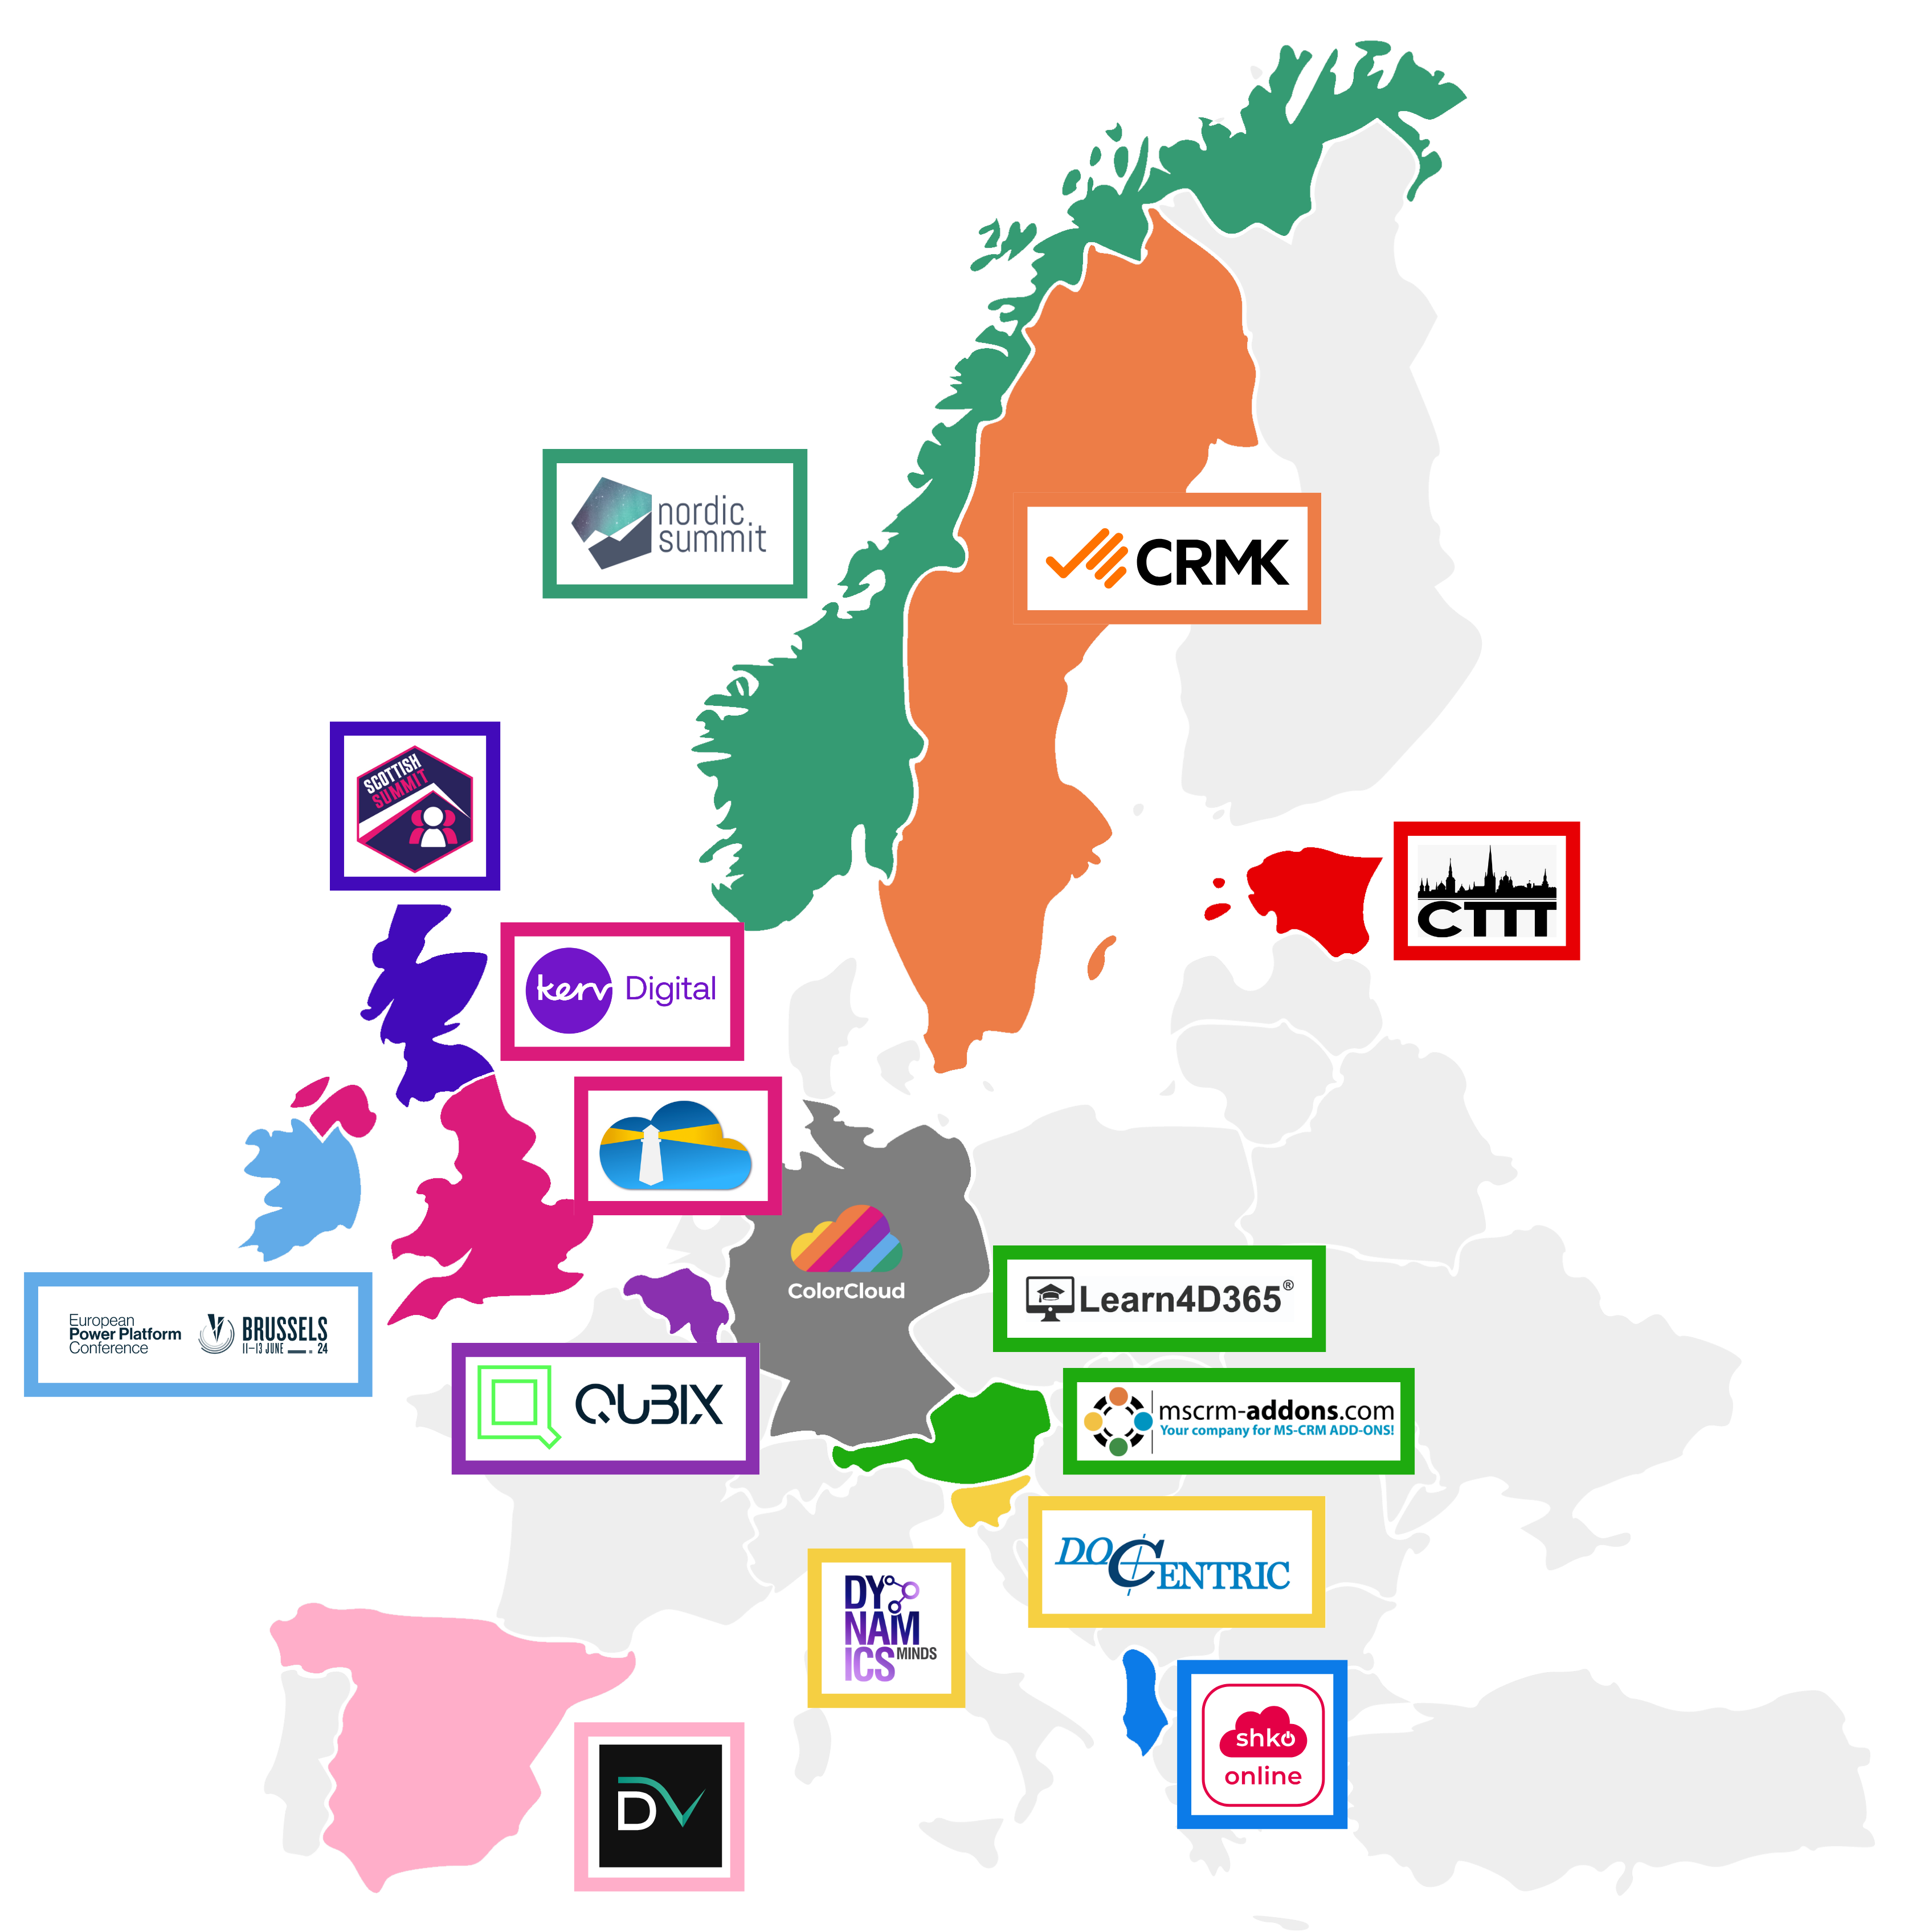 A map of Europe with the logos of all ColorCloud supporters